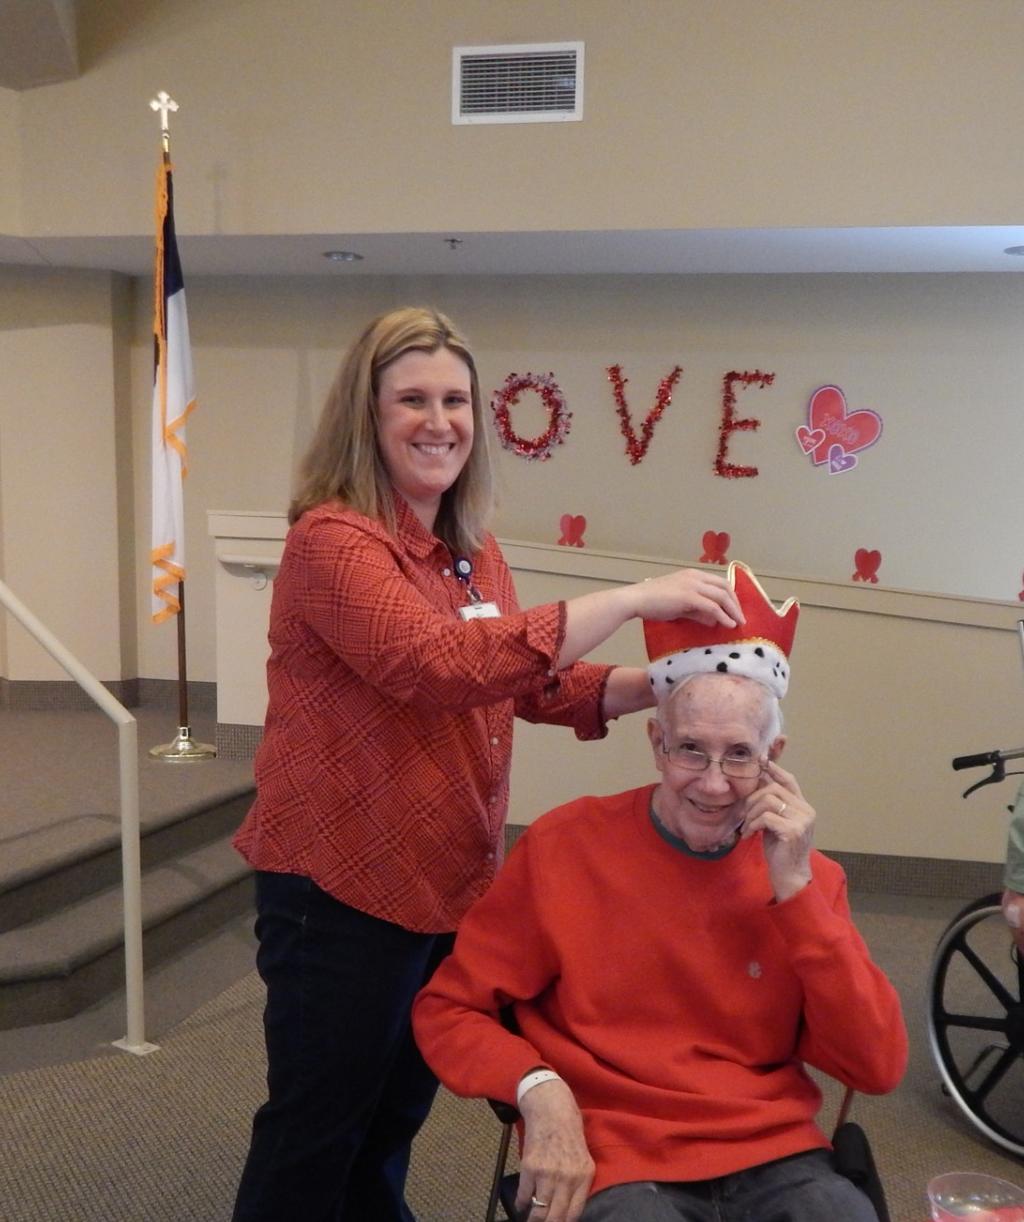 With the room filled with hearts and roses, each resident enjoyed refreshments and fun together